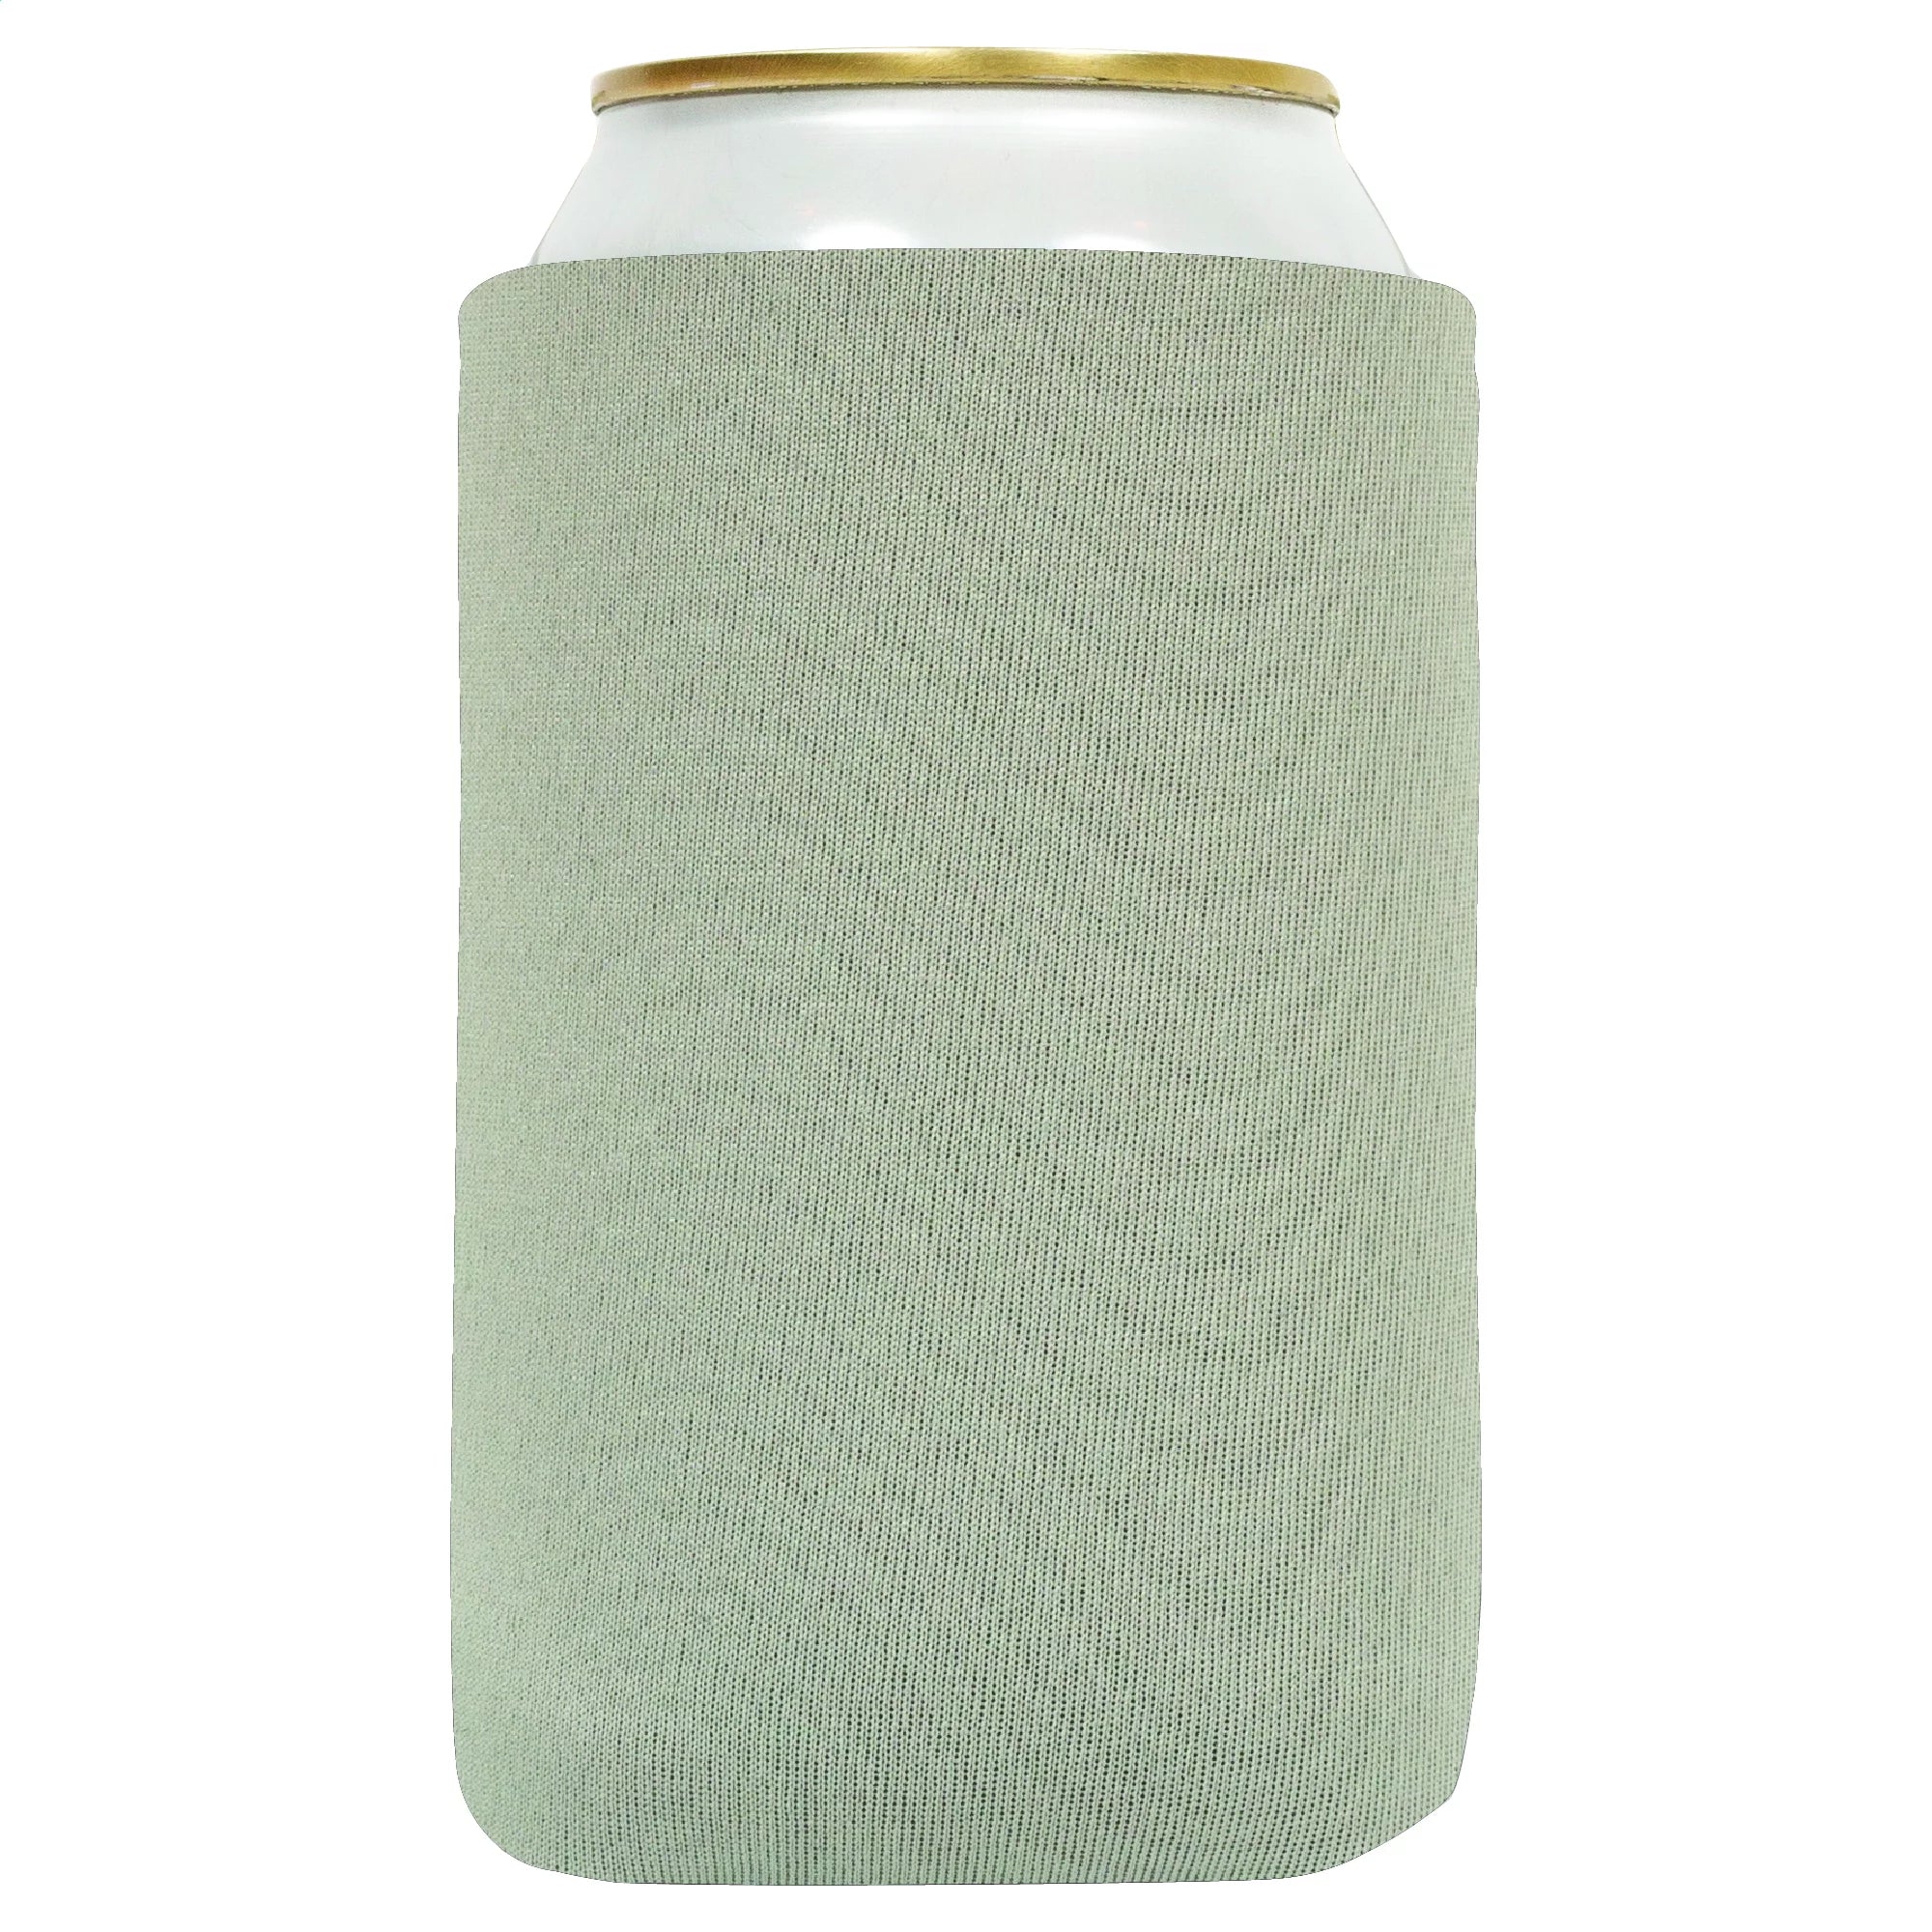 Insulated Koozies On Sale » Made In Michigan